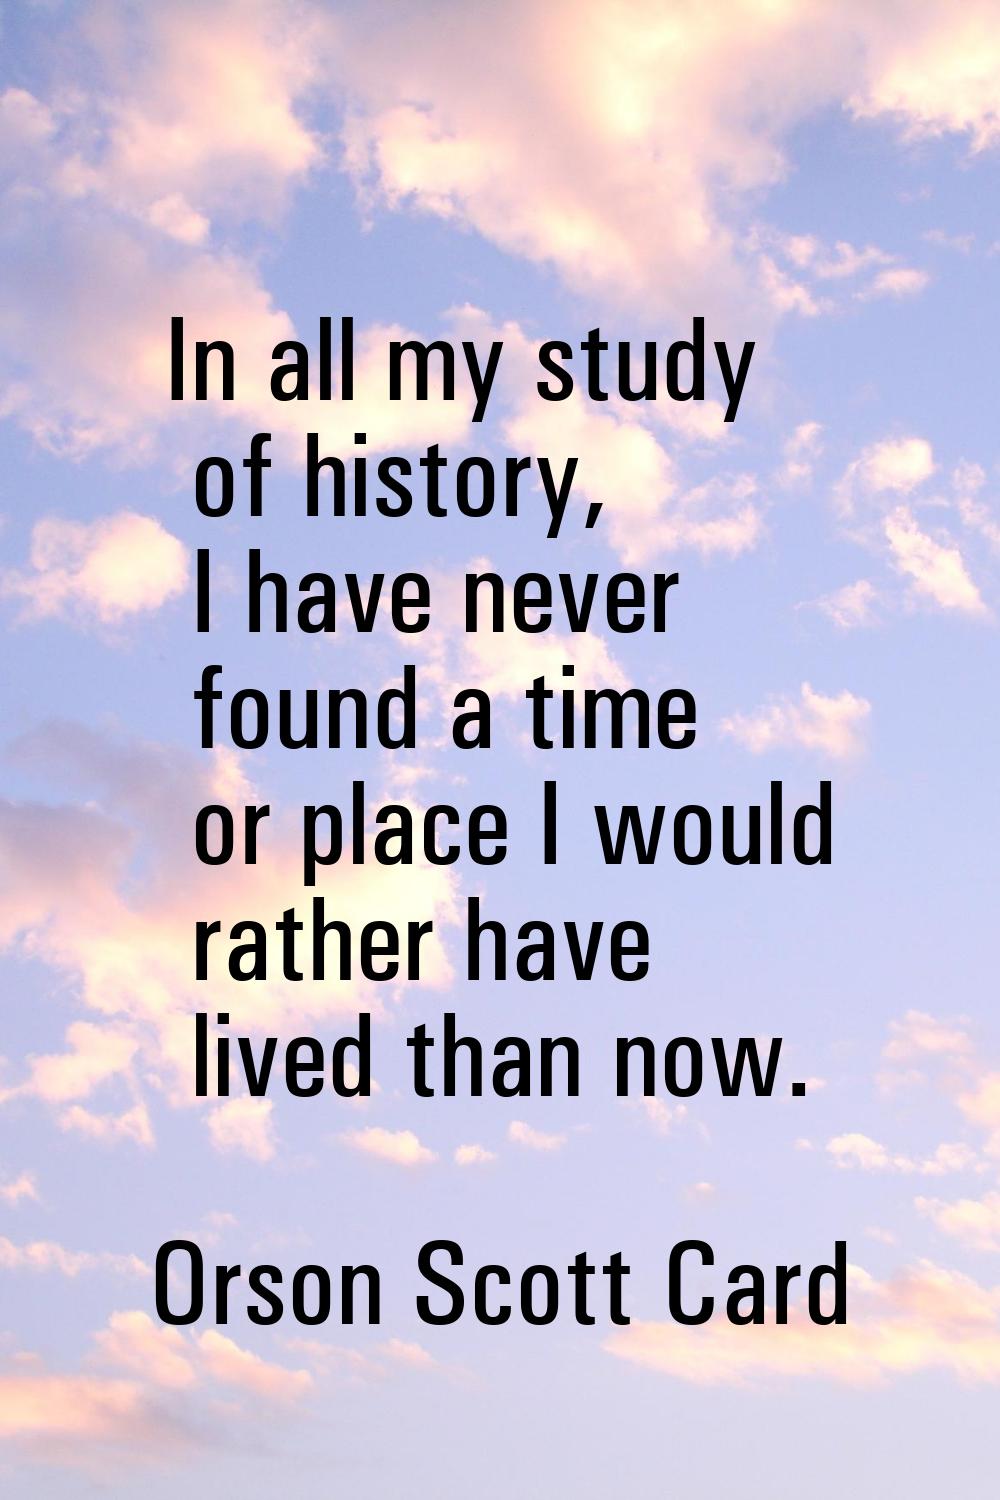 In all my study of history, I have never found a time or place I would rather have lived than now.